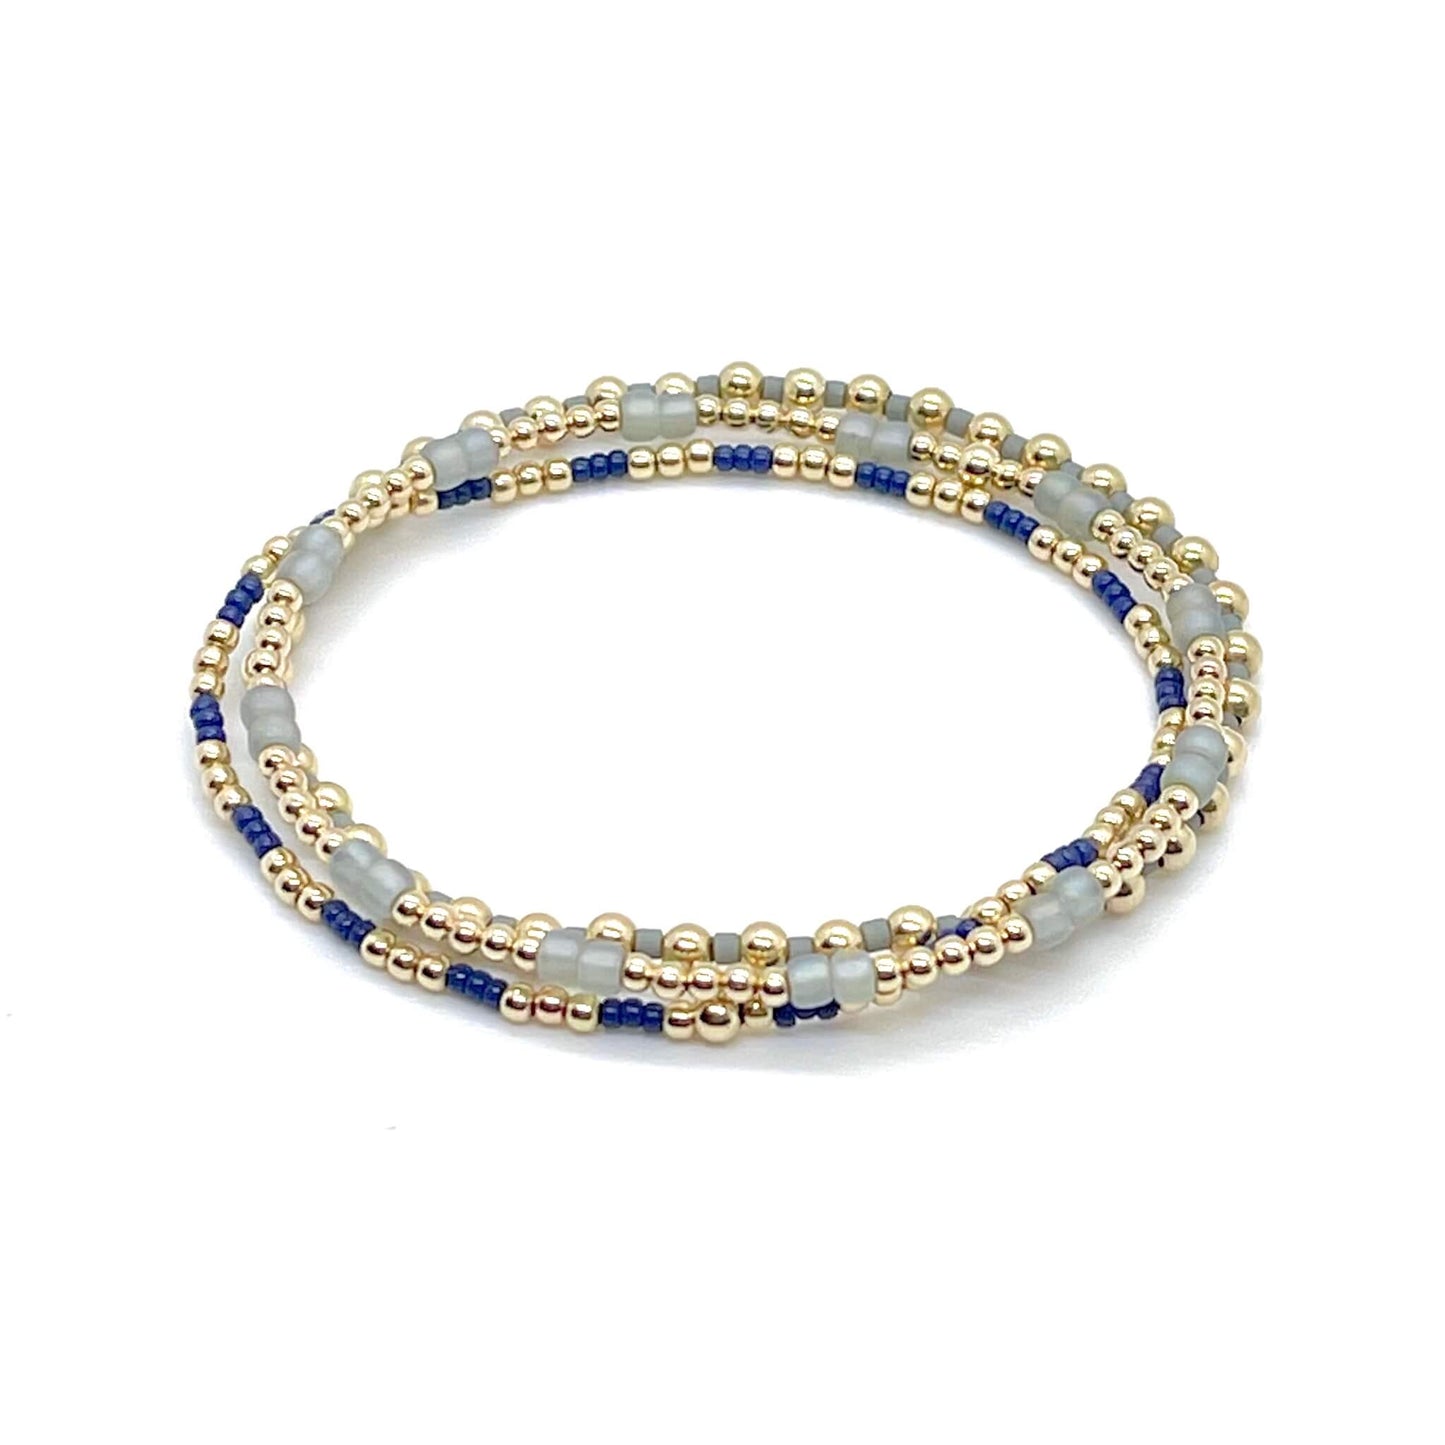 Handmade delicate gold beaded stretch bracelets with gray and navy blue tiny seed beads | Stack of 3.